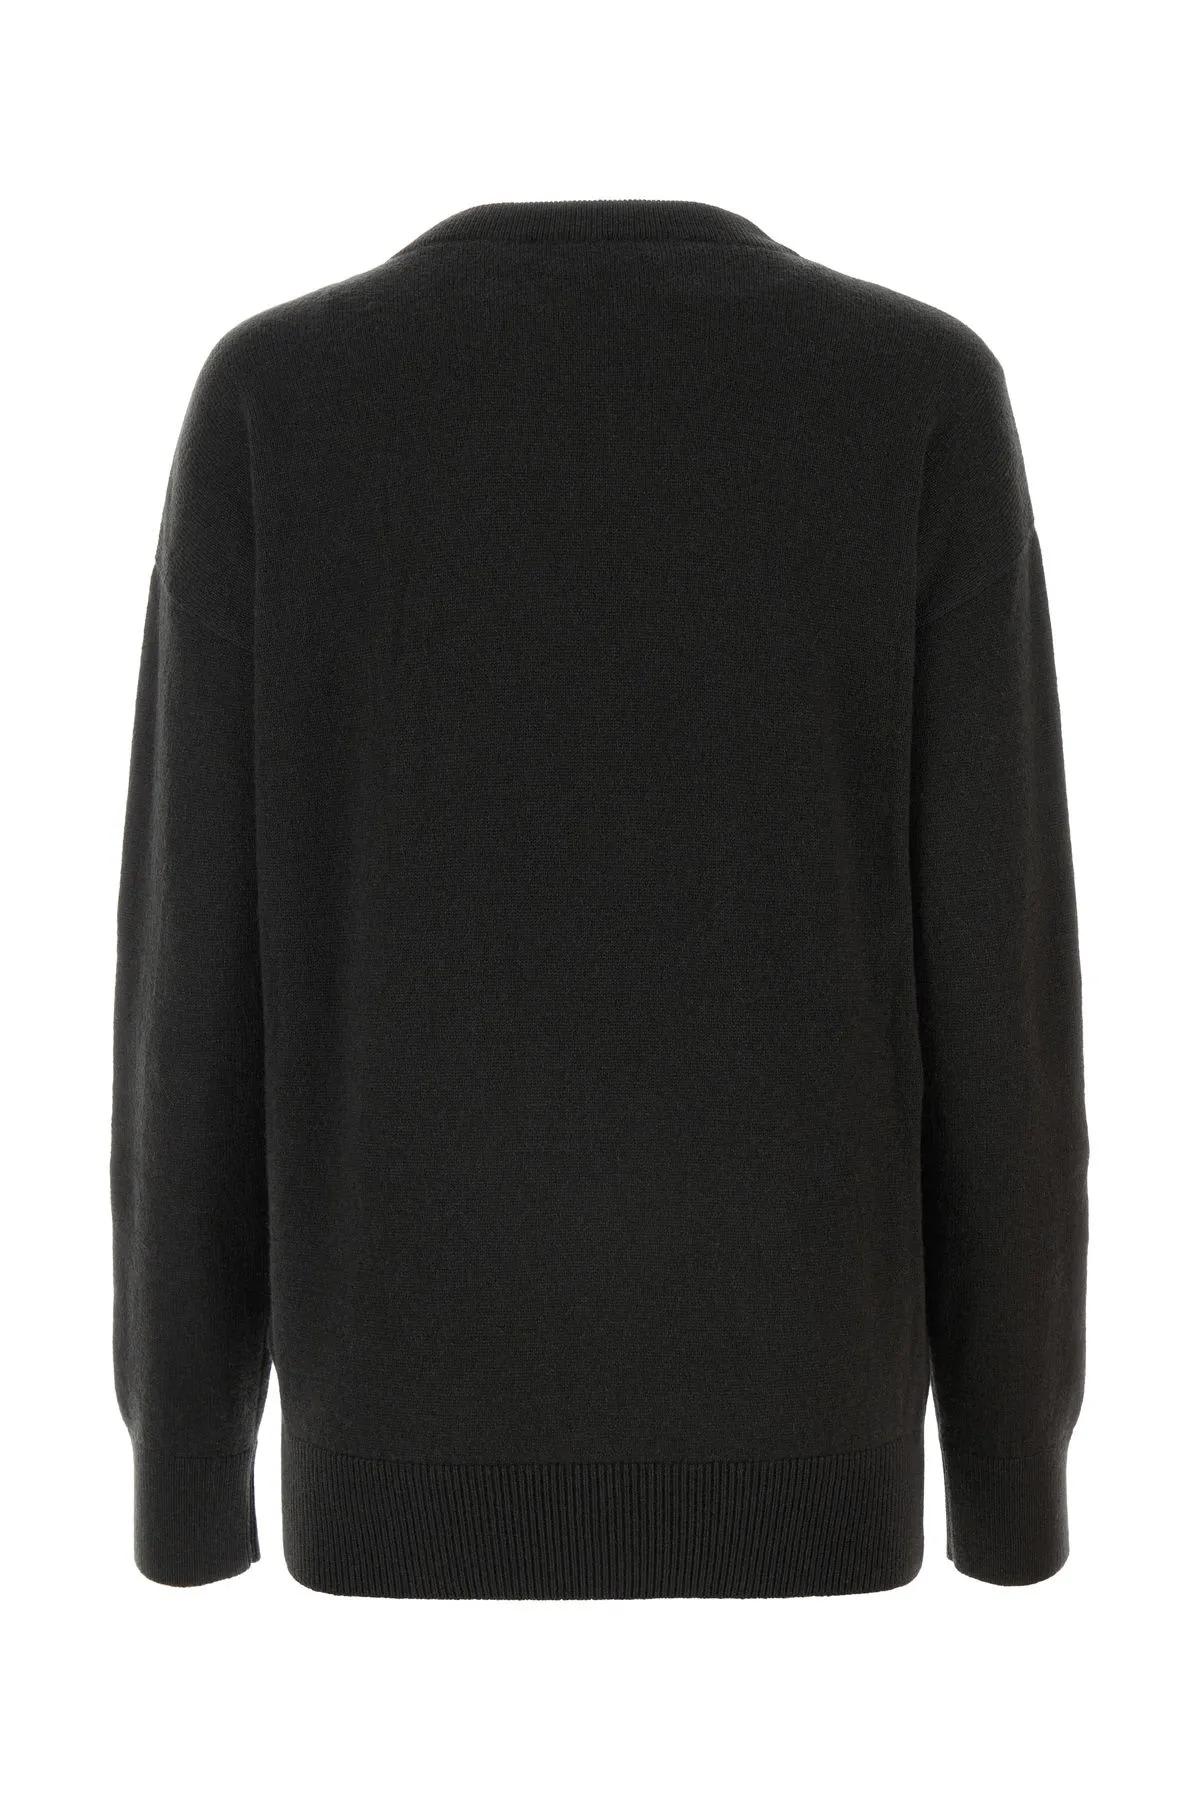 Shop Burberry Pin Sweater In Onyx